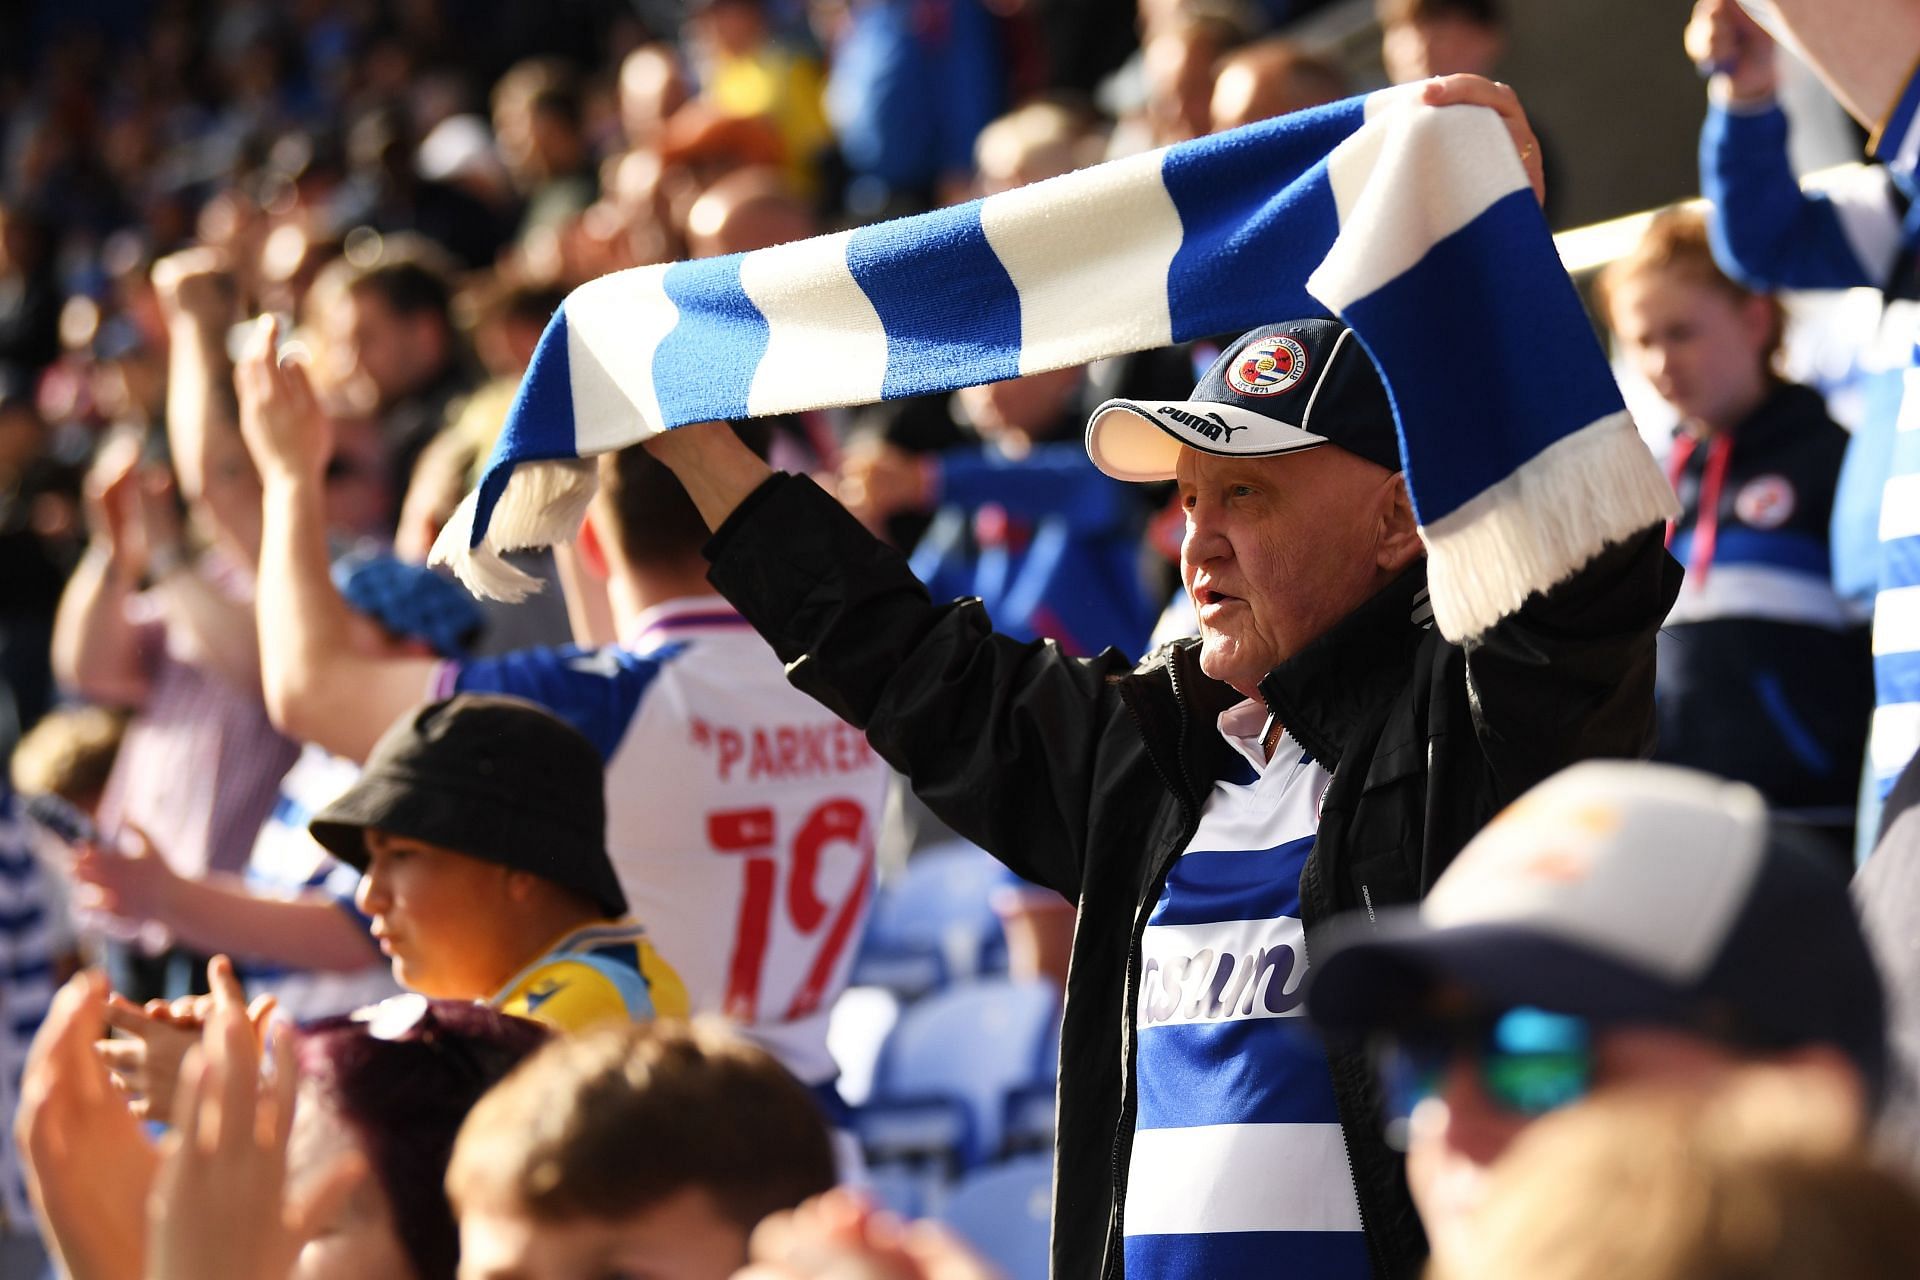 Reading fans supporting their team - Sky Bet Championship